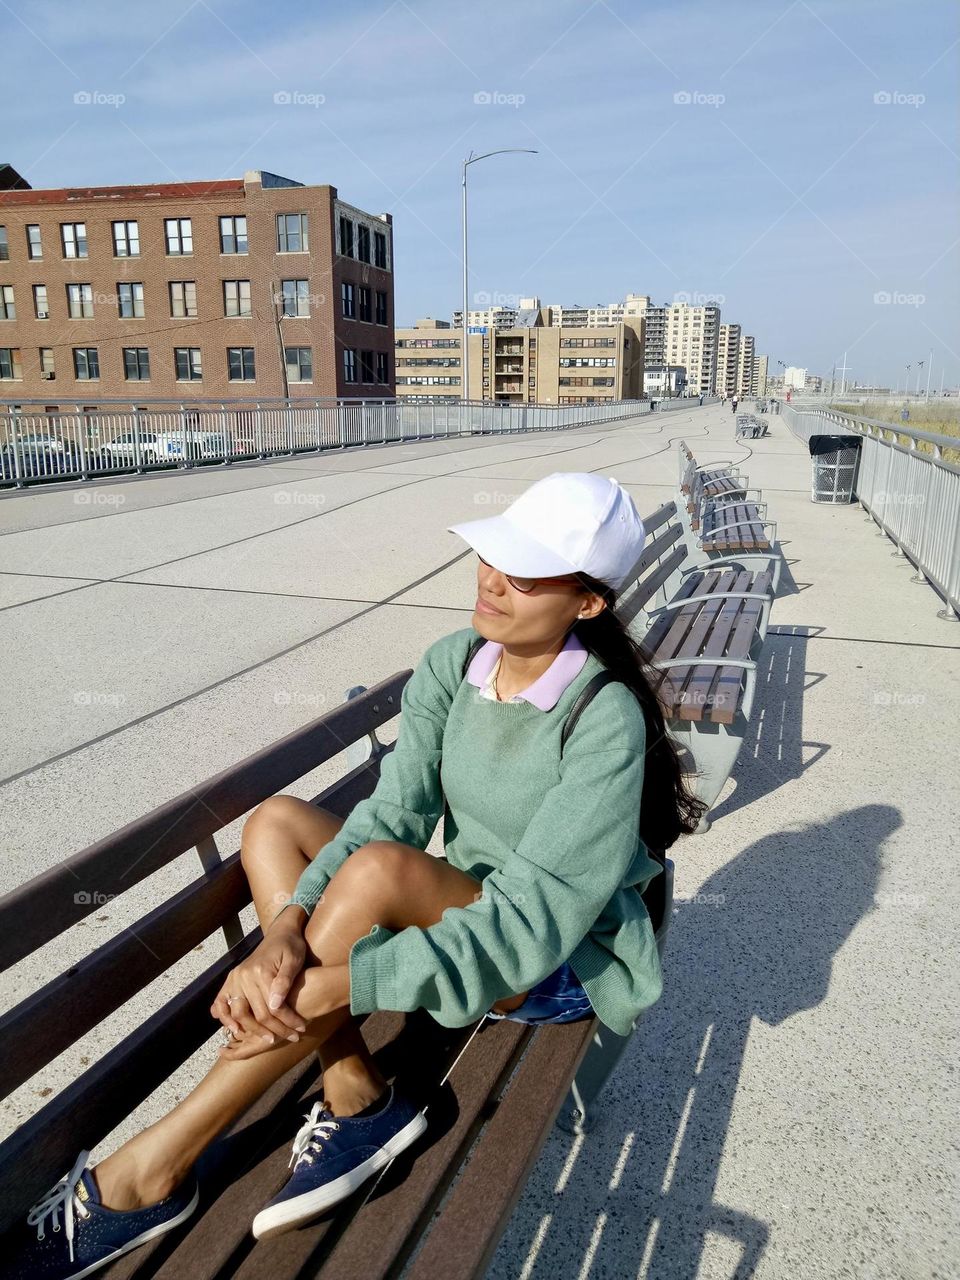 A woman sitting on the bench wearing a white baseball hat against the blue sky and buildings.